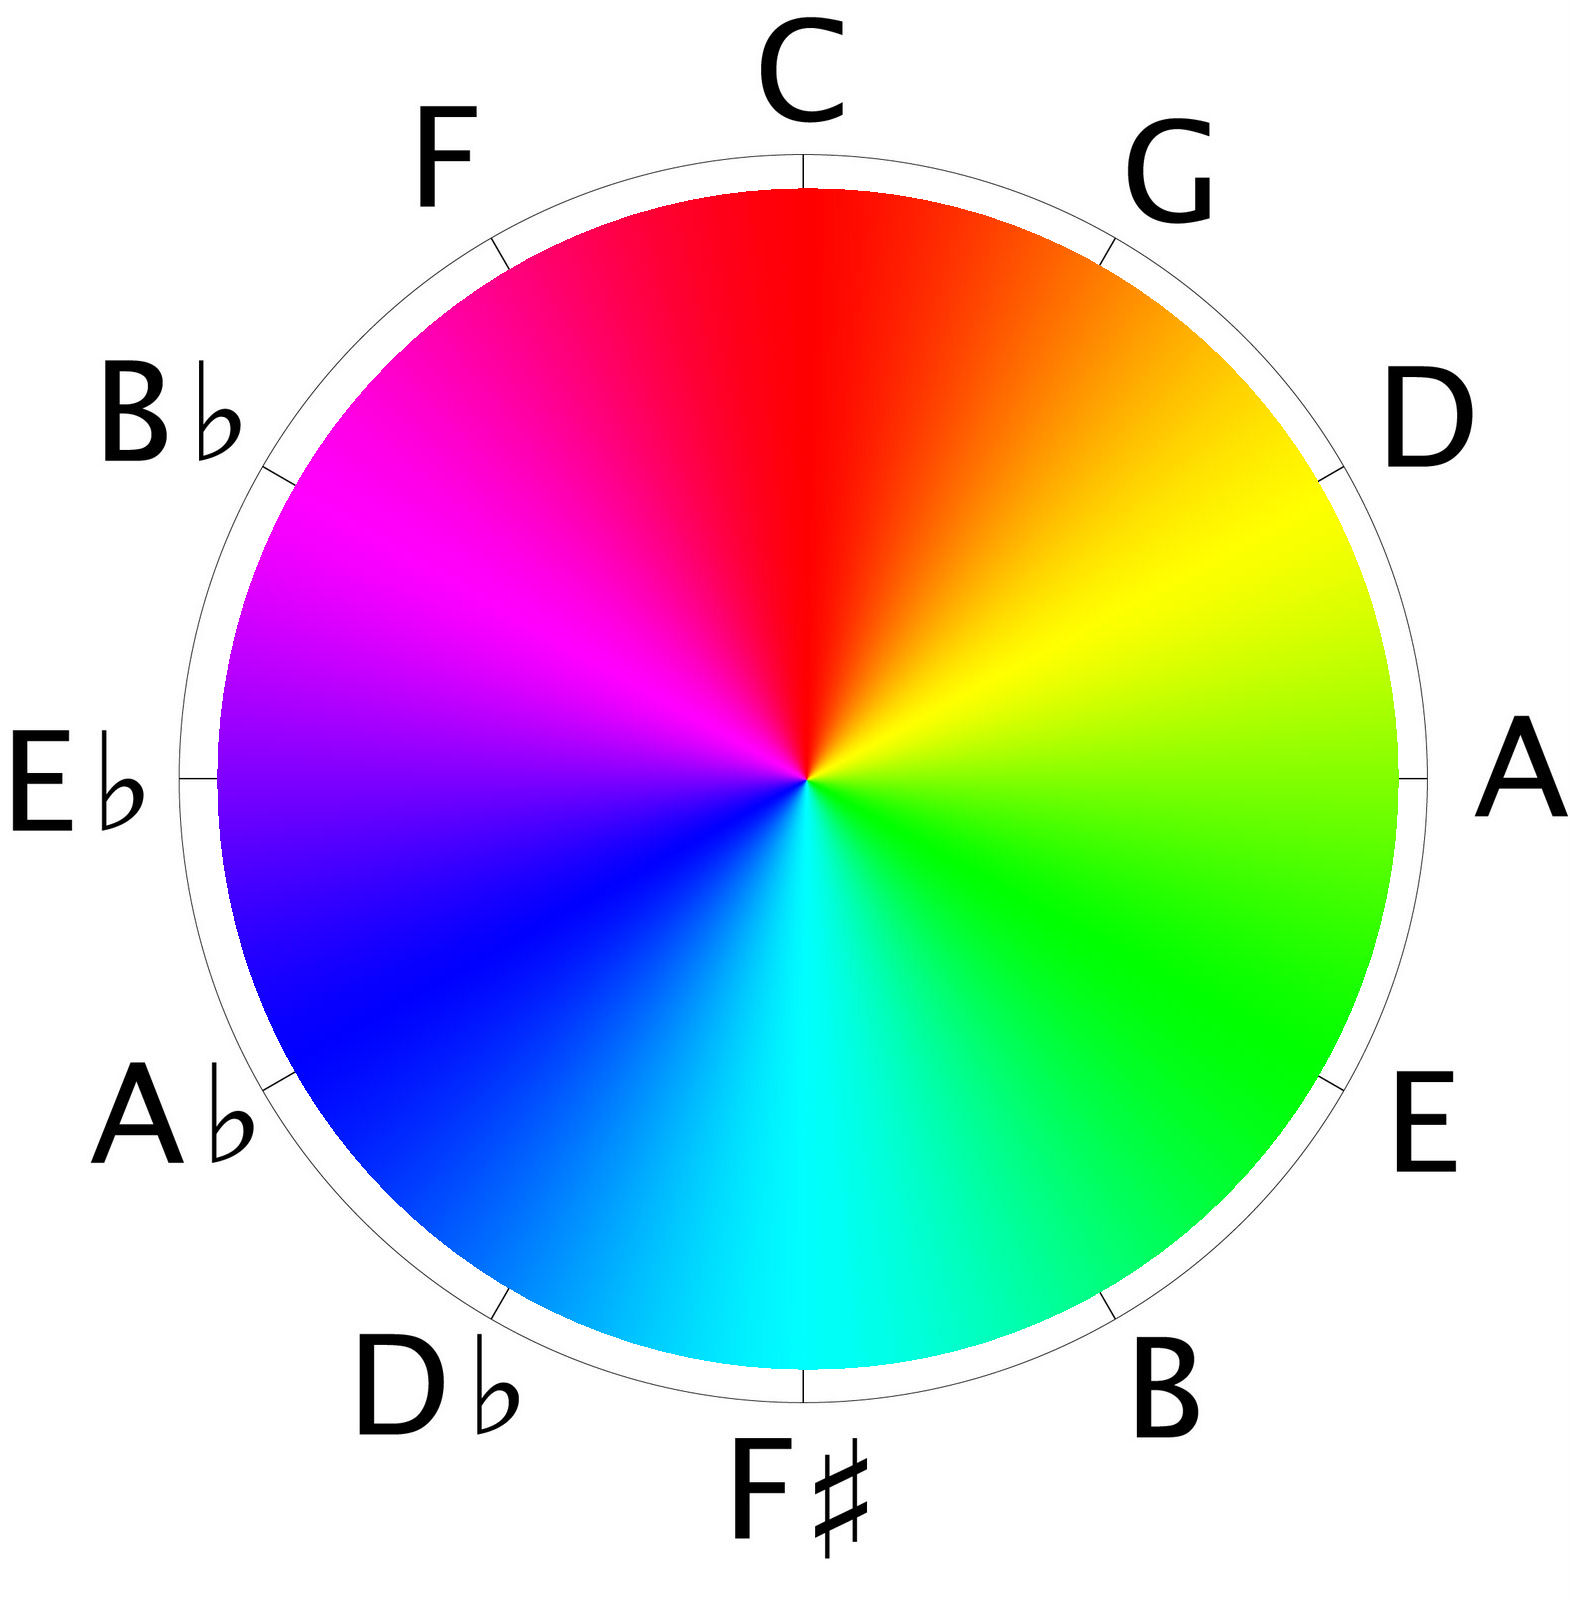 Circle of Fifths, with RGB colour wheel